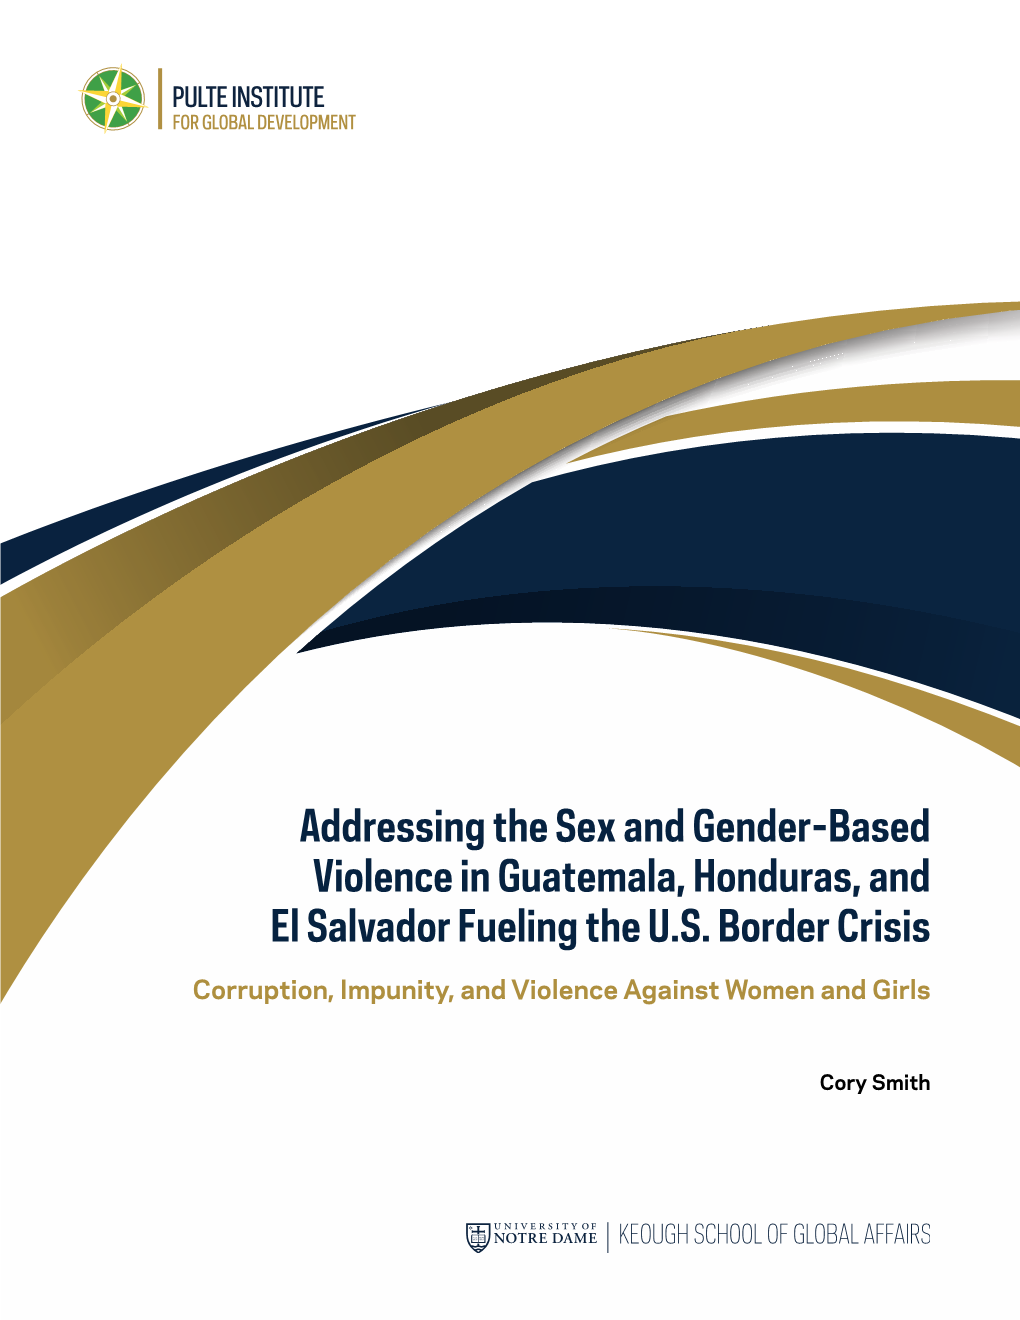 Addressing the Sex and Gender-Based Violence in Guatemala, Honduras, and El Salvador Fueling the U.S. Border Crisis